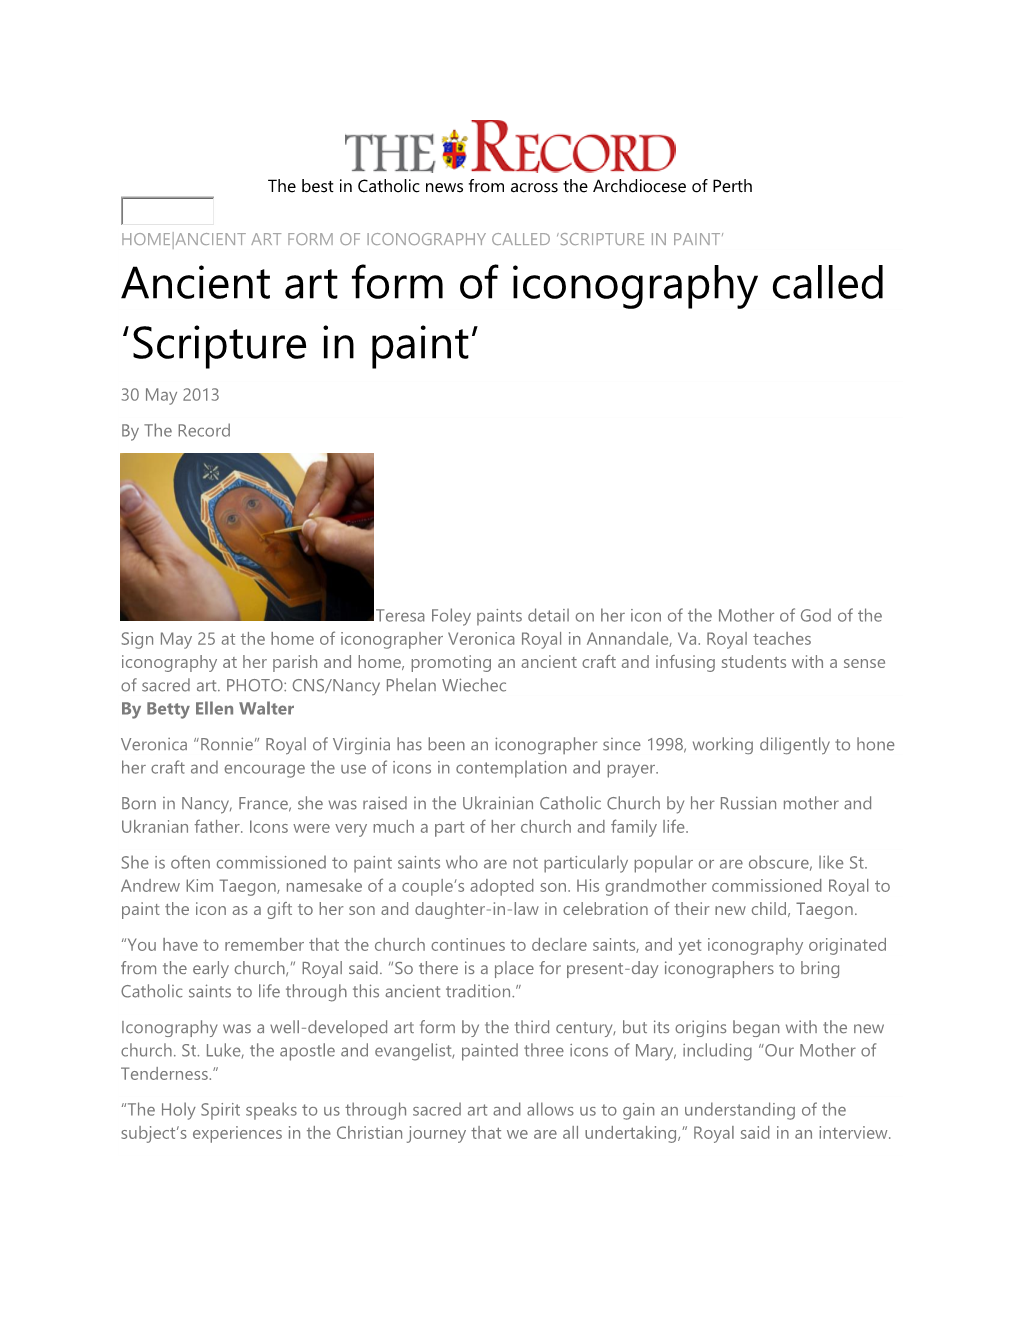 Ancient Art Form of Iconography Called 'Scripture in Paint'